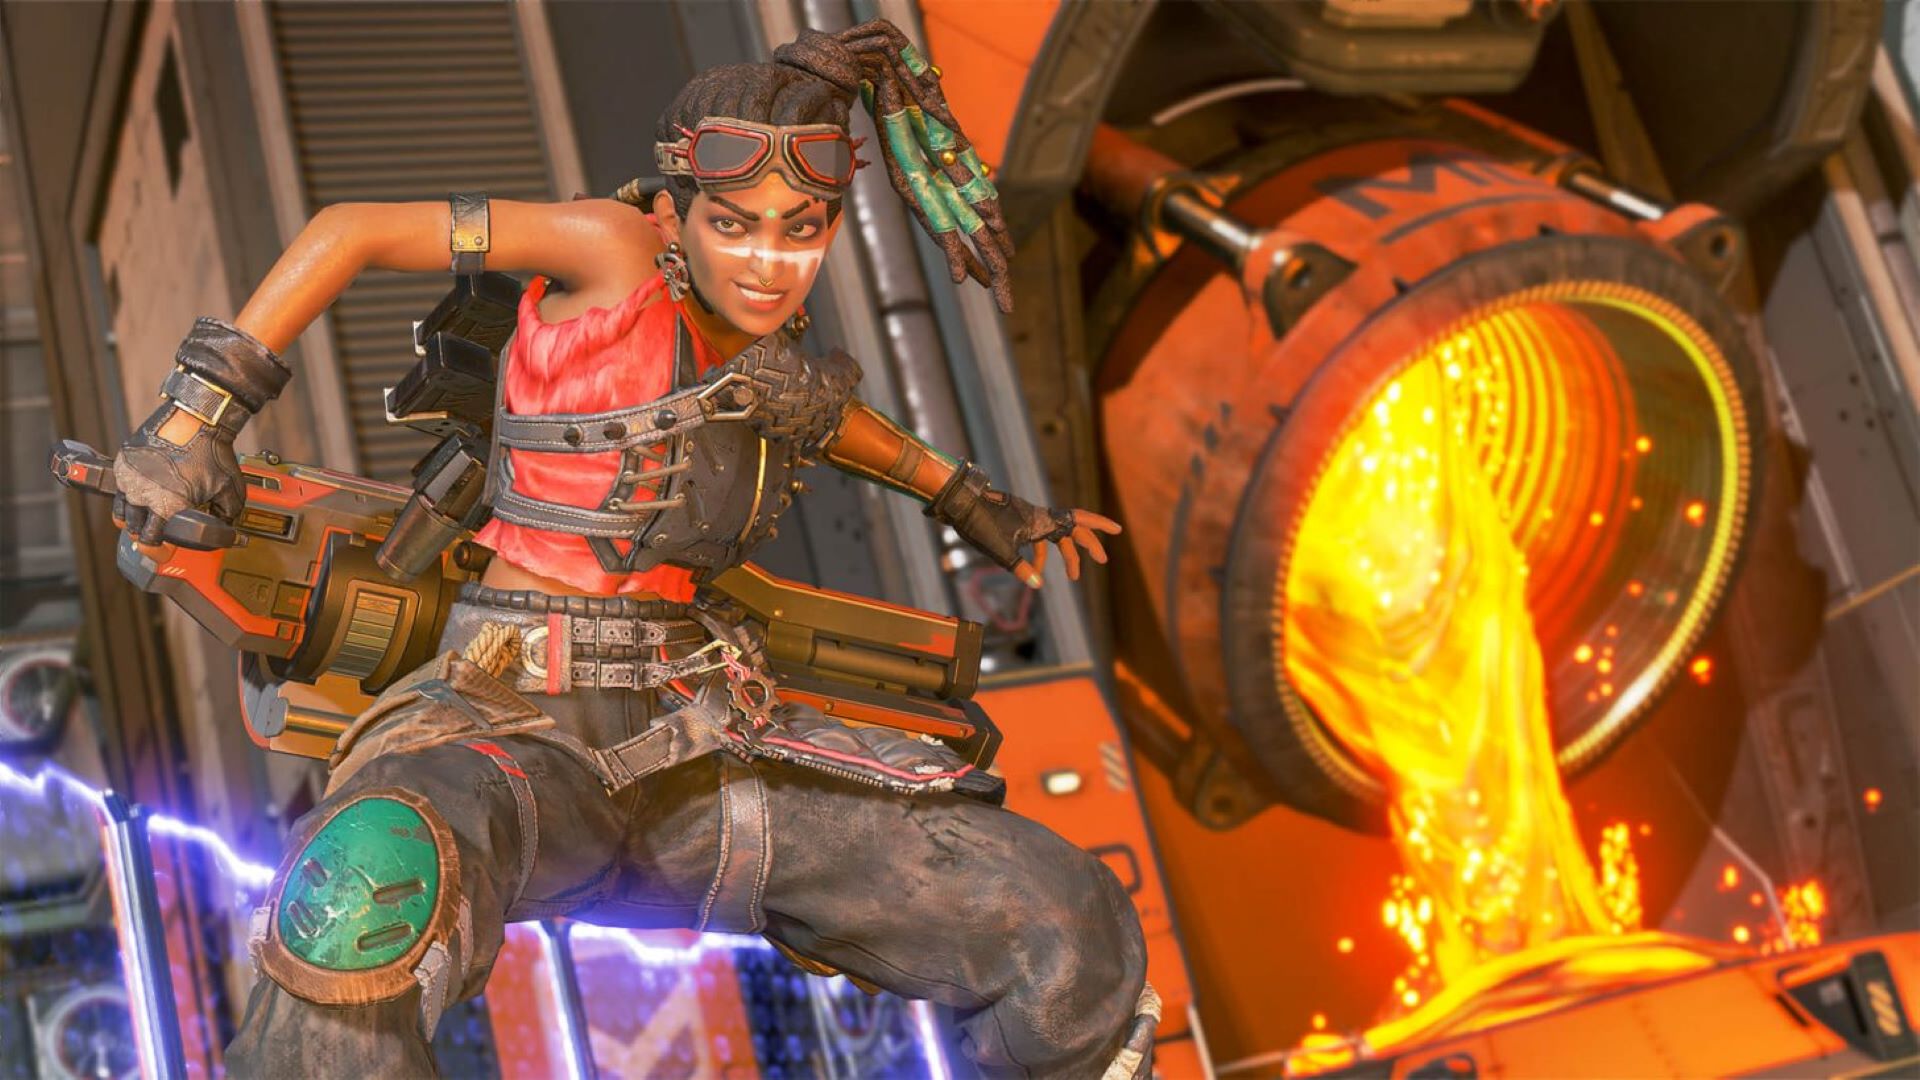 Apex Legends Thrillseekers event debuts a new Arenas map, skins